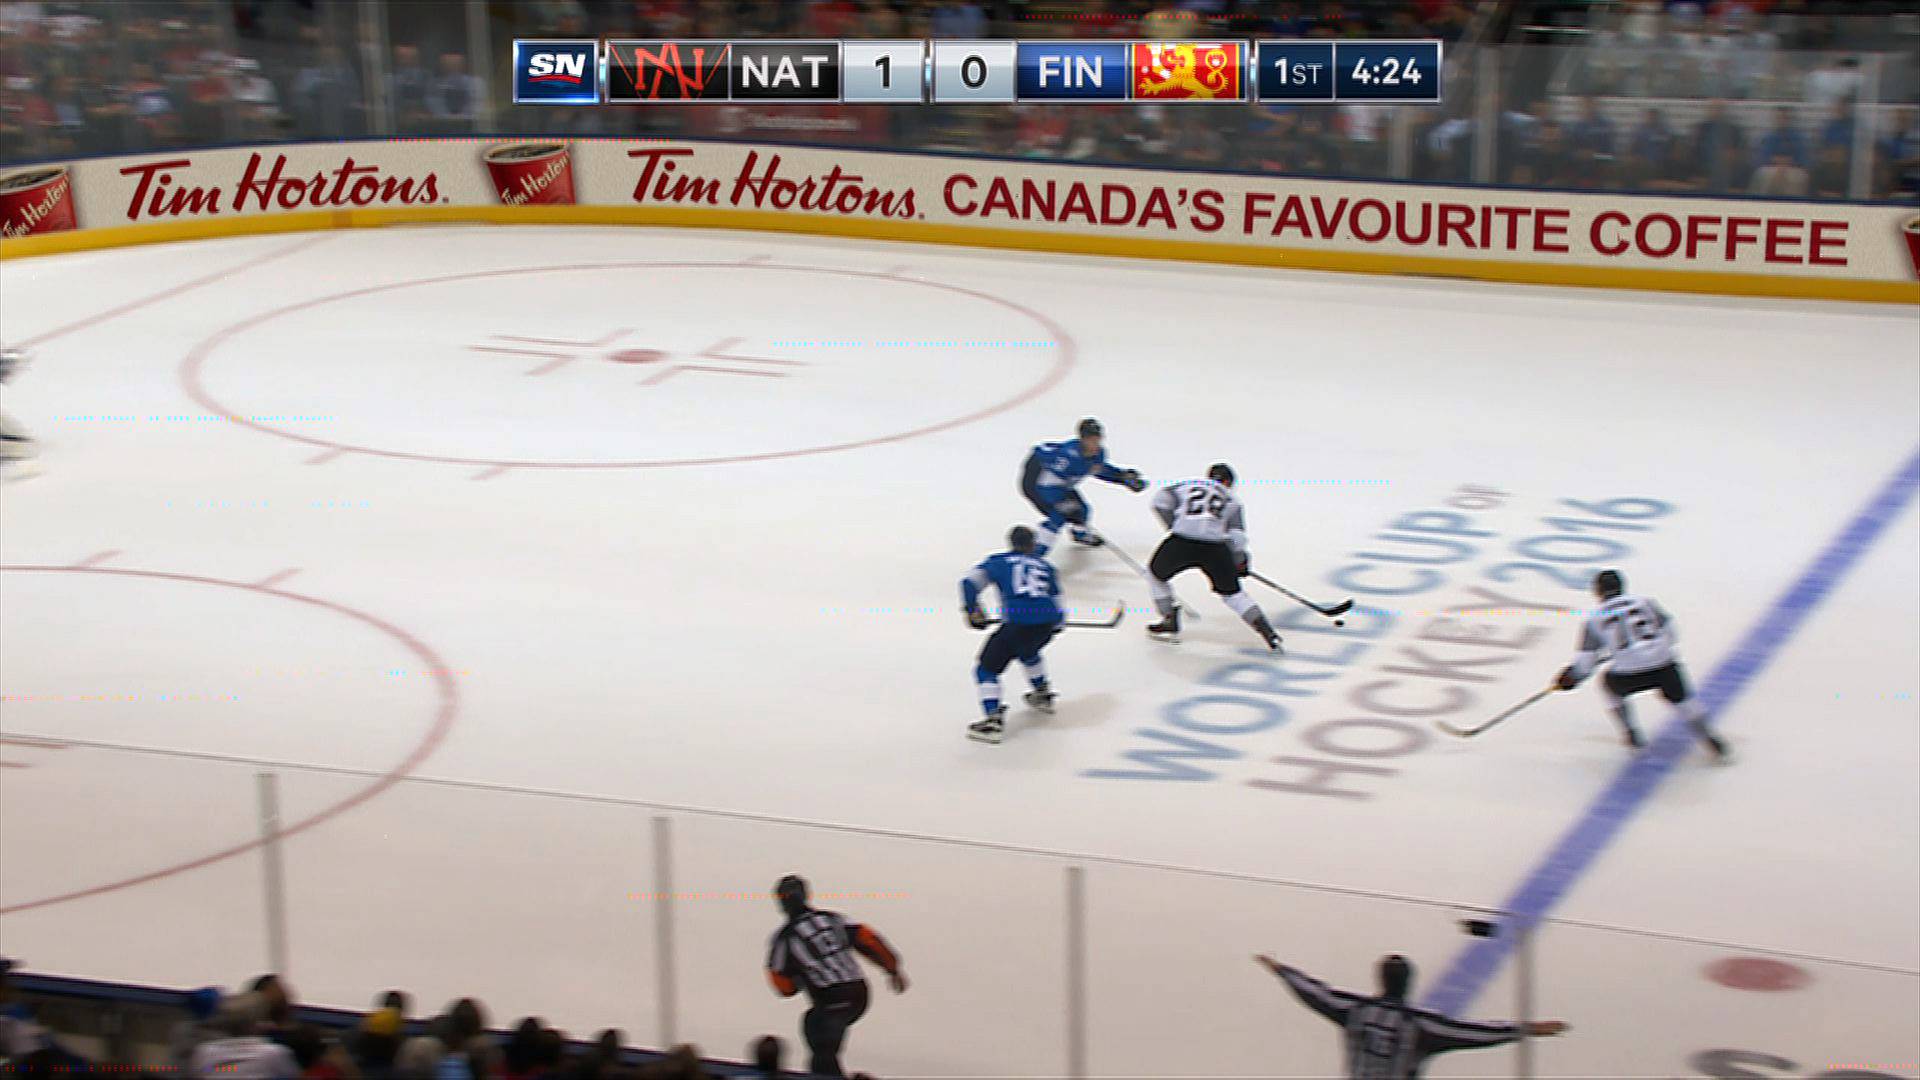 The ads are virtual, but for some NHL fans, the irritation is real